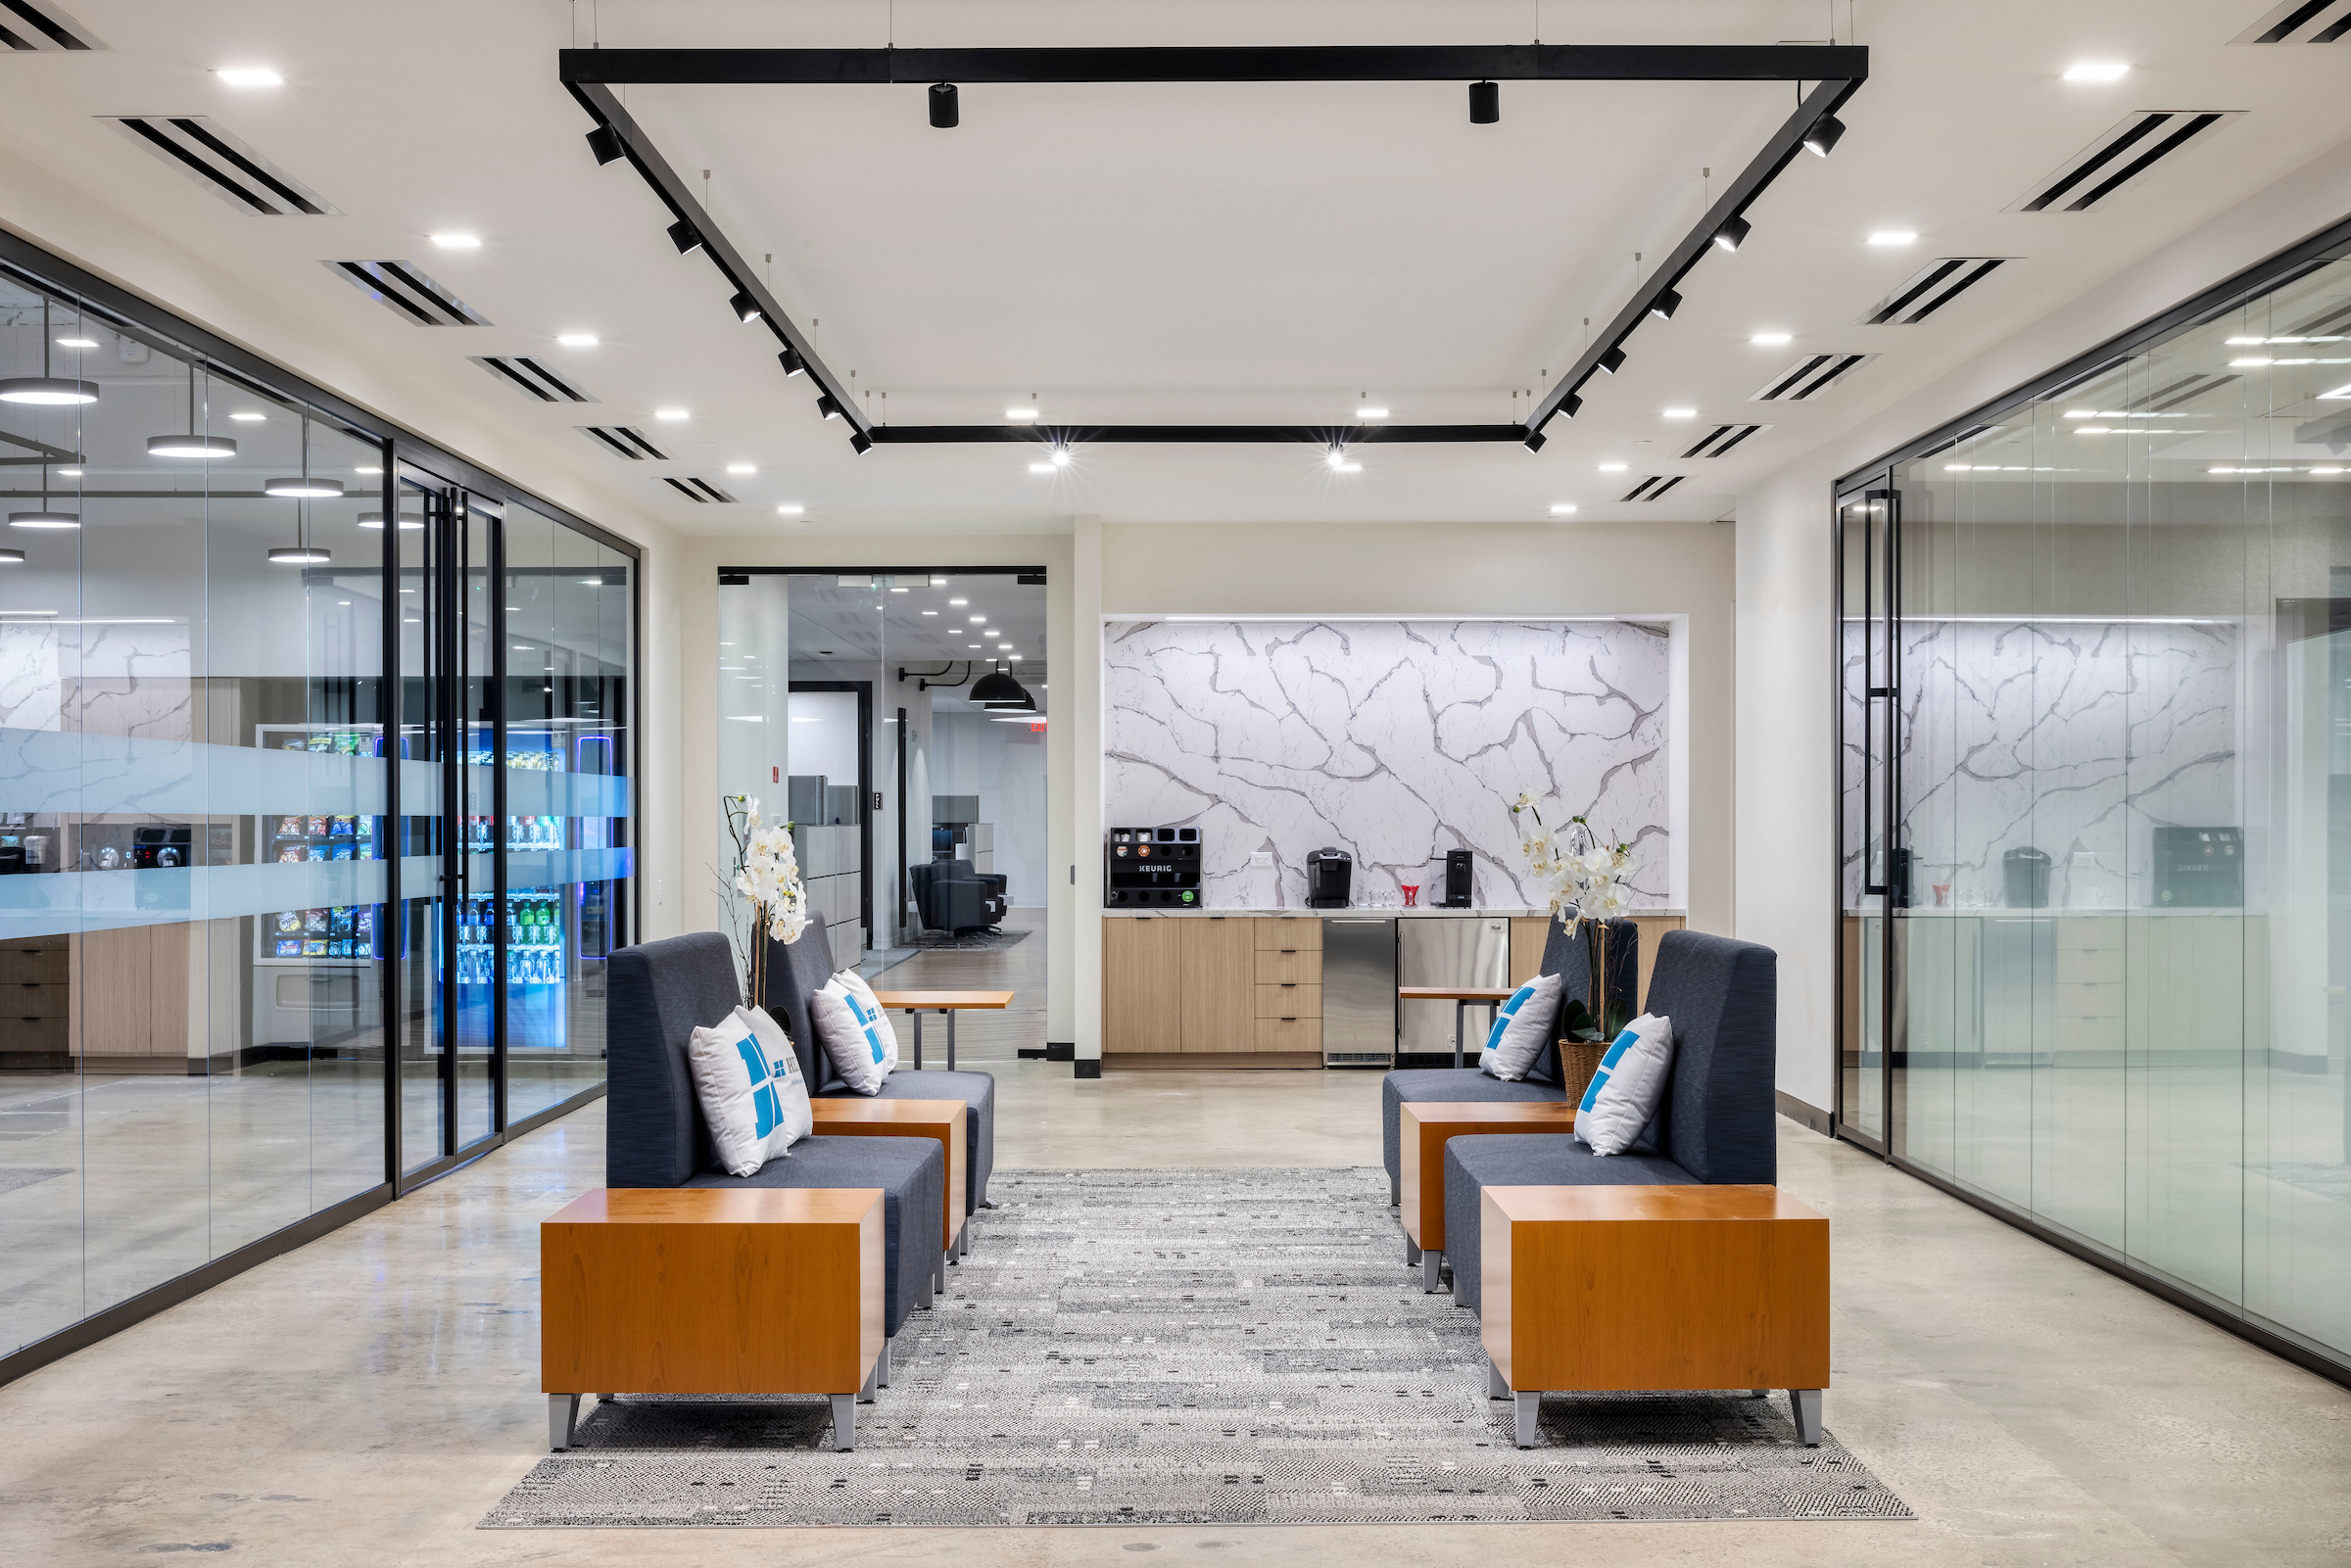 SJP Project Solutions Completes Built-Out of Helsinn’s 25,000-SF Workspace at 200 Wood Avenue South in Iselin, N.J.